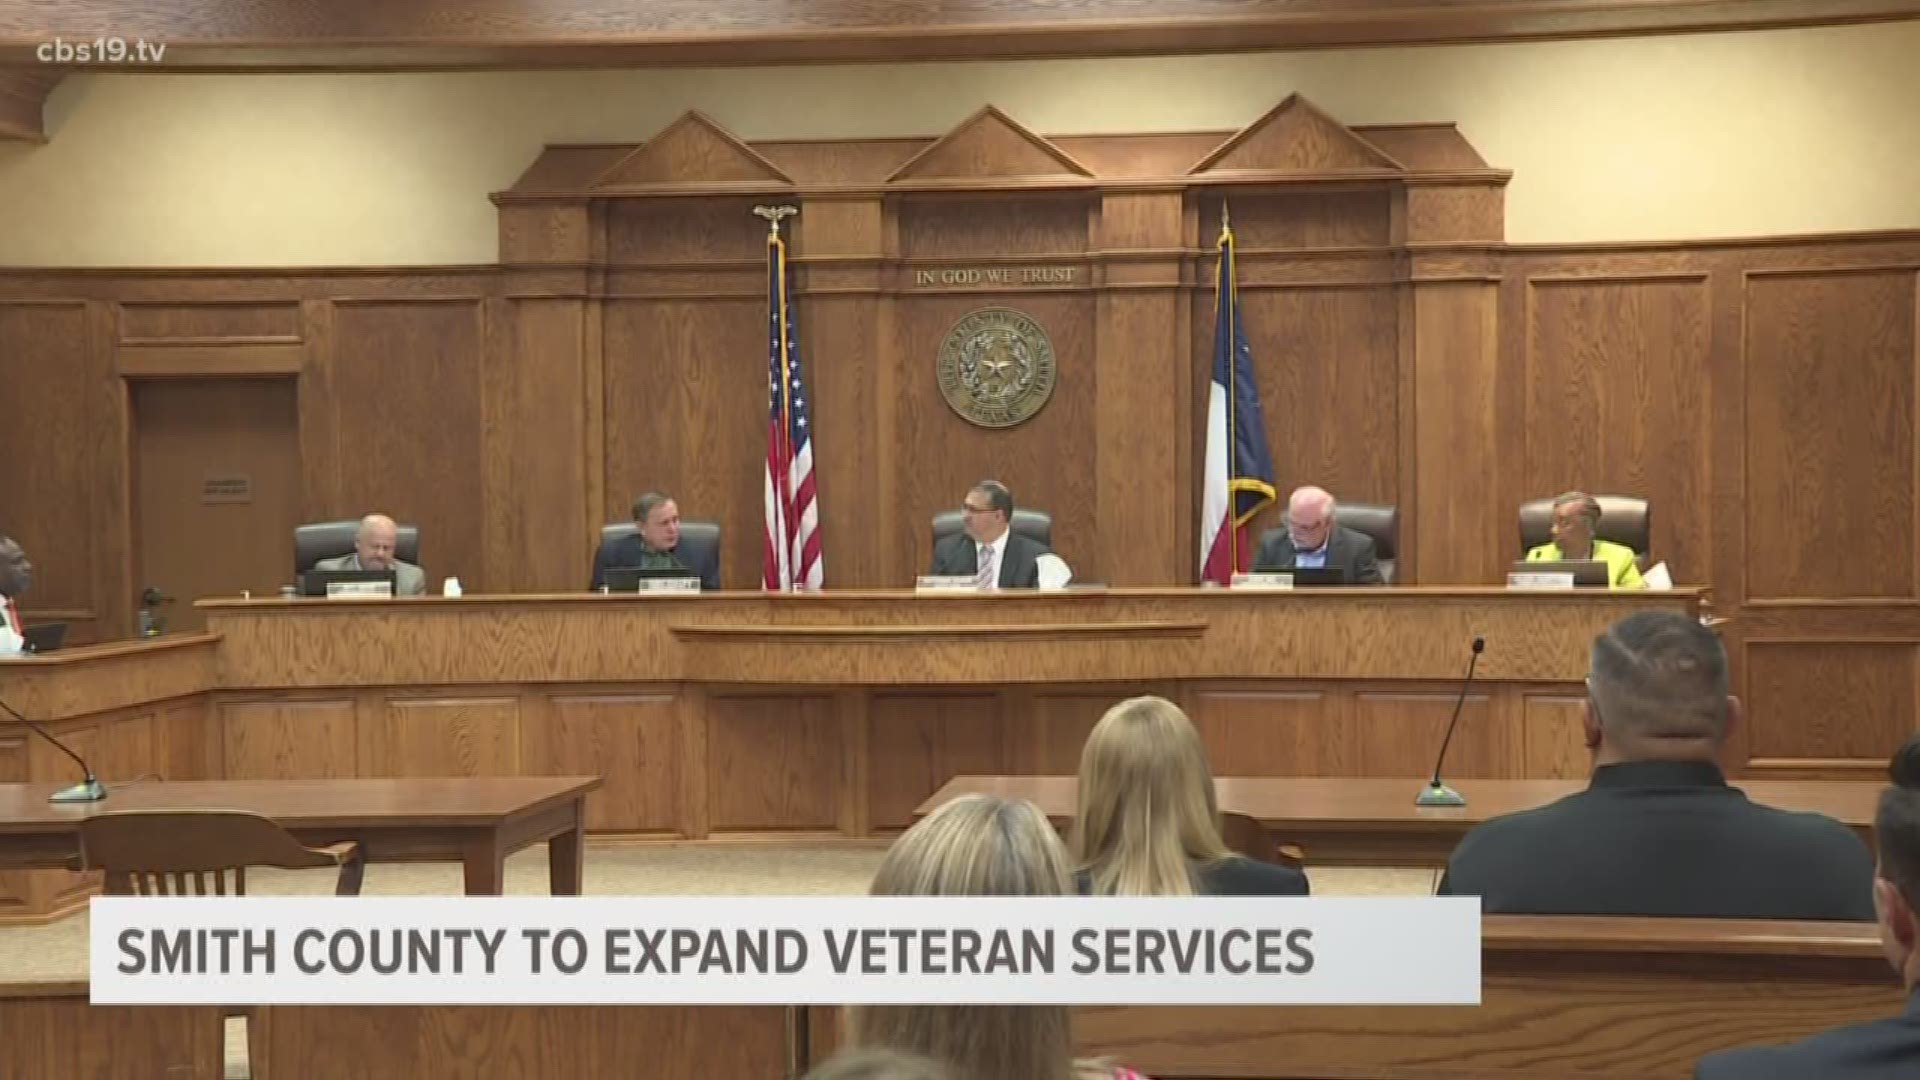 The Smith County Veteran Services Office will be adding an additional location at CampV on Front Street in Tyler.